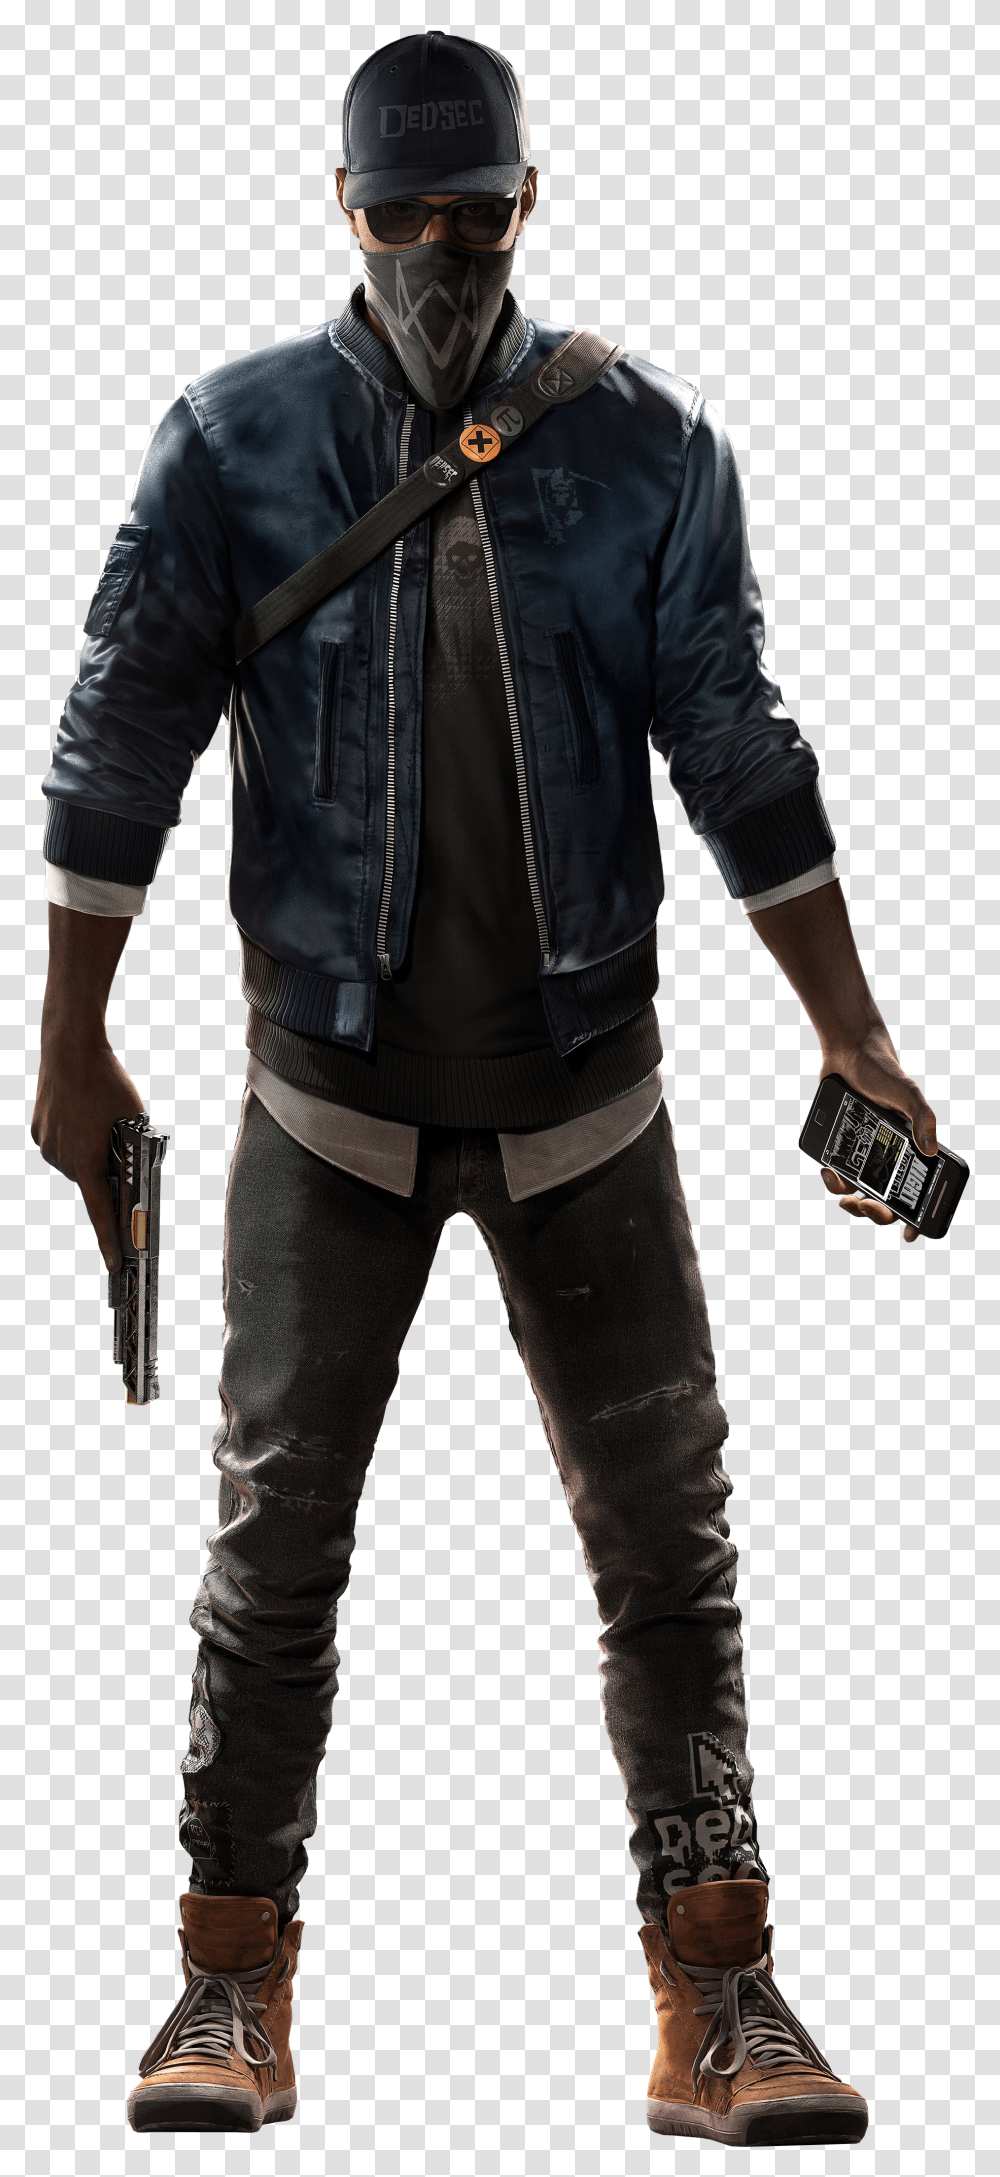 Marcus Watch Dogs 2 Watch Dogs 2 Marcus Cosplay Transparent Png